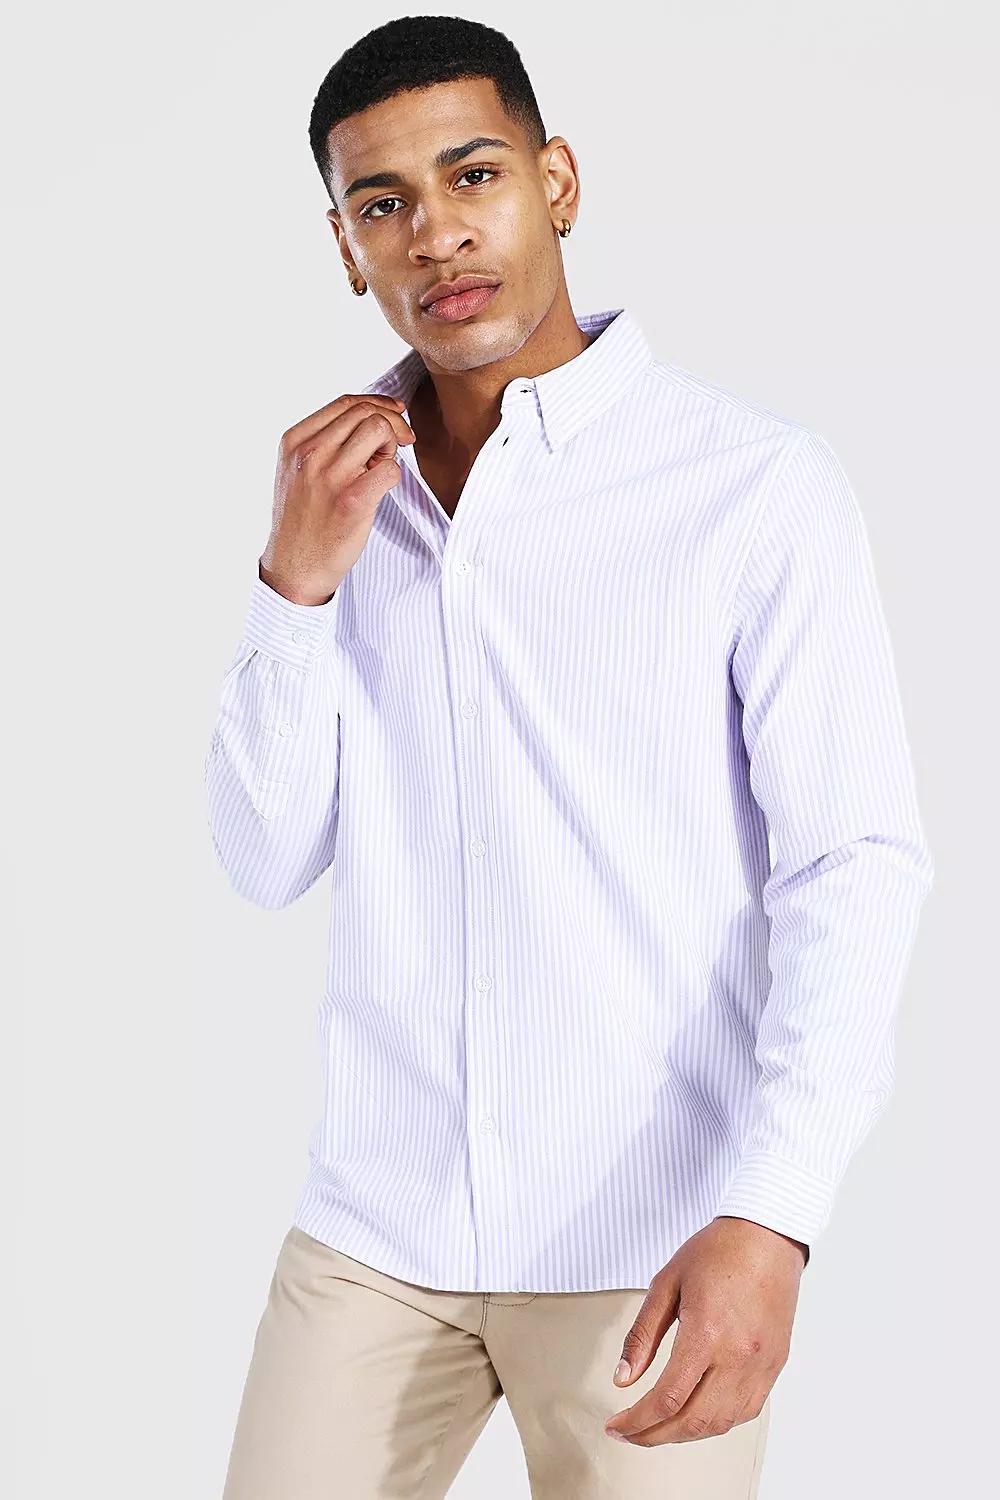 HTOOHTOOH Mens Stripe Printed Cotton Linen Long Sleeve Casual Business Button Front Shirts